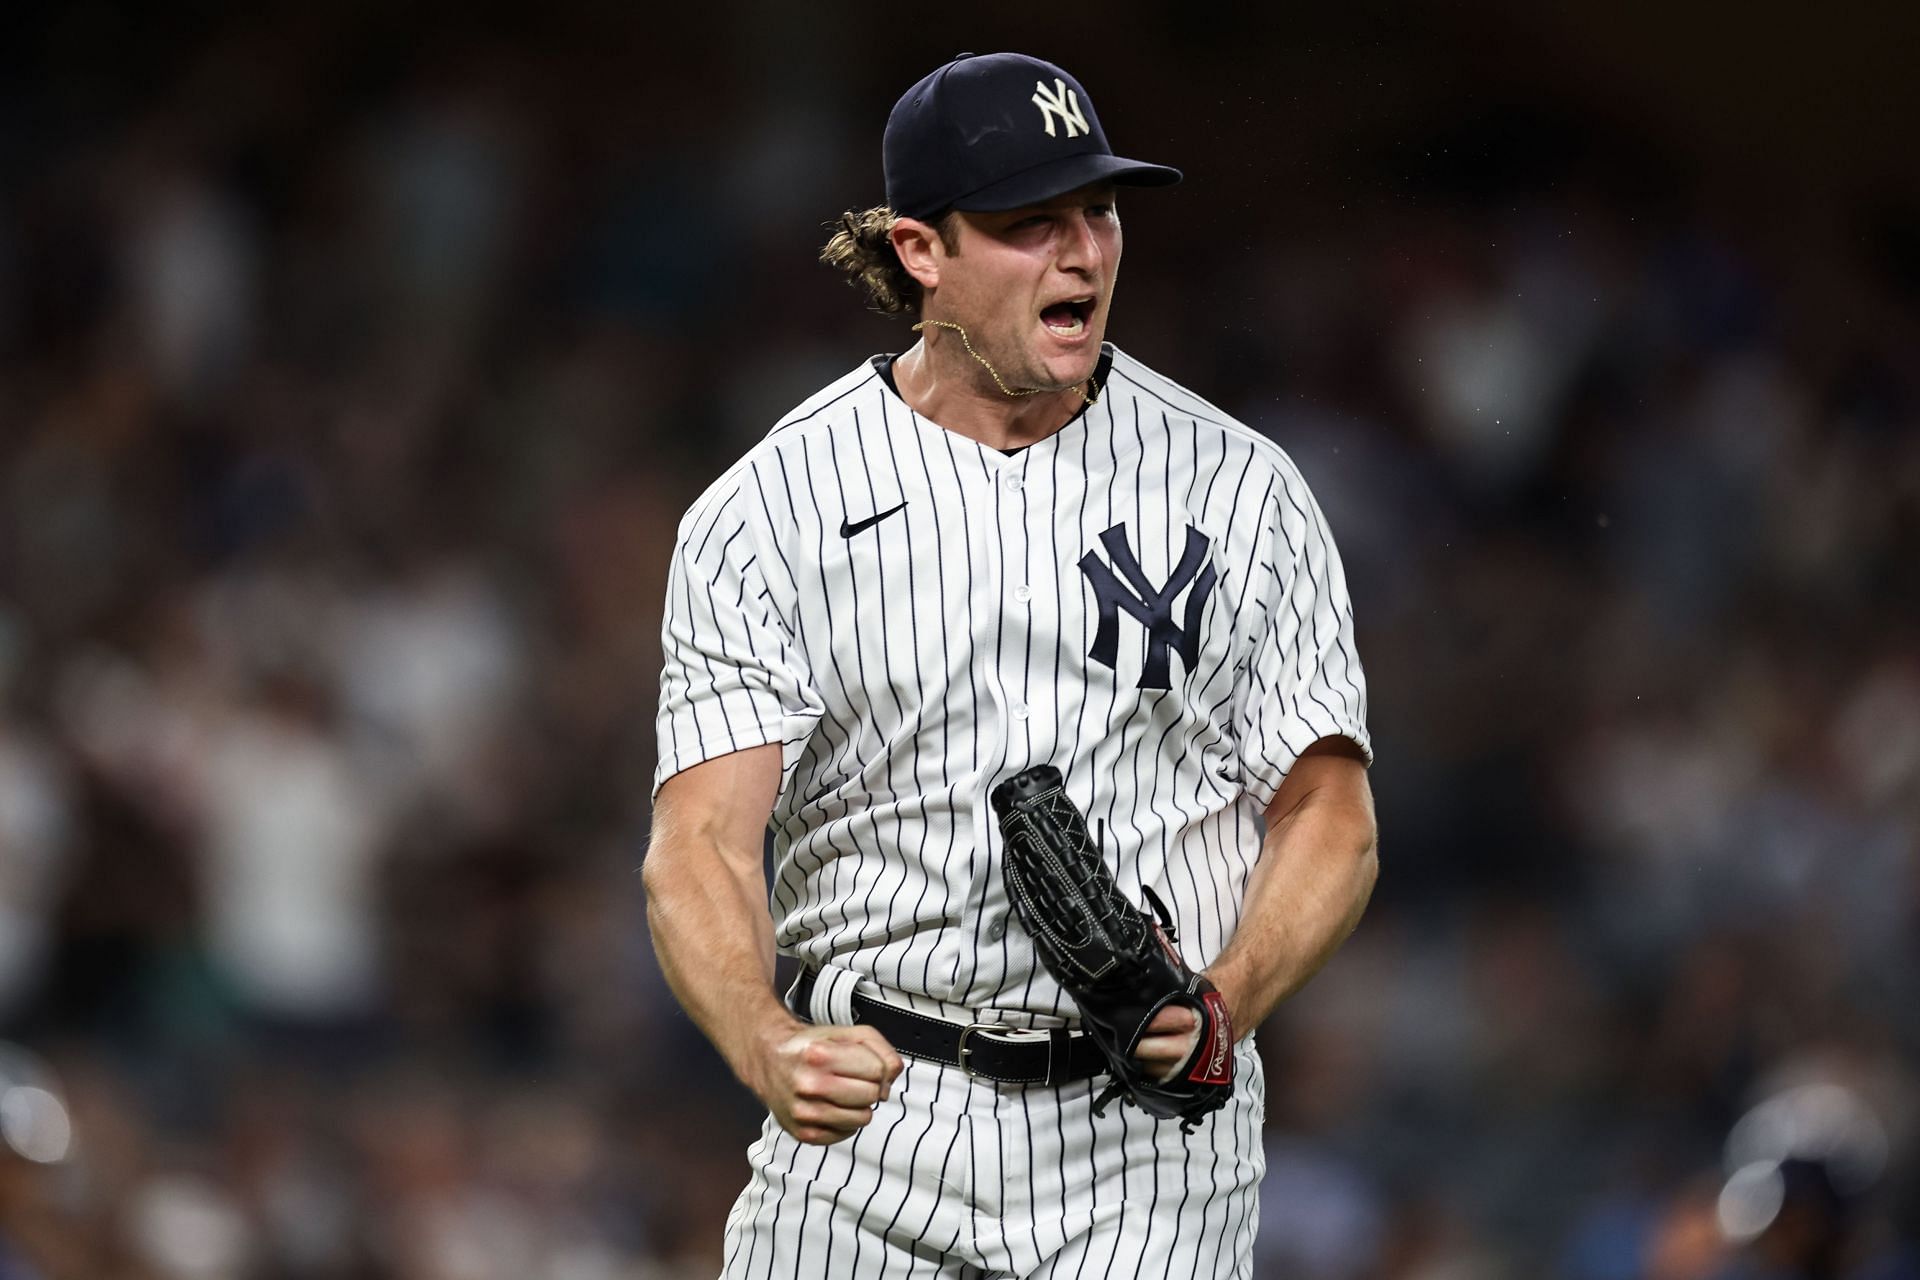 Gerrit Cole goes the distance with a two-hitter for Yankees in a